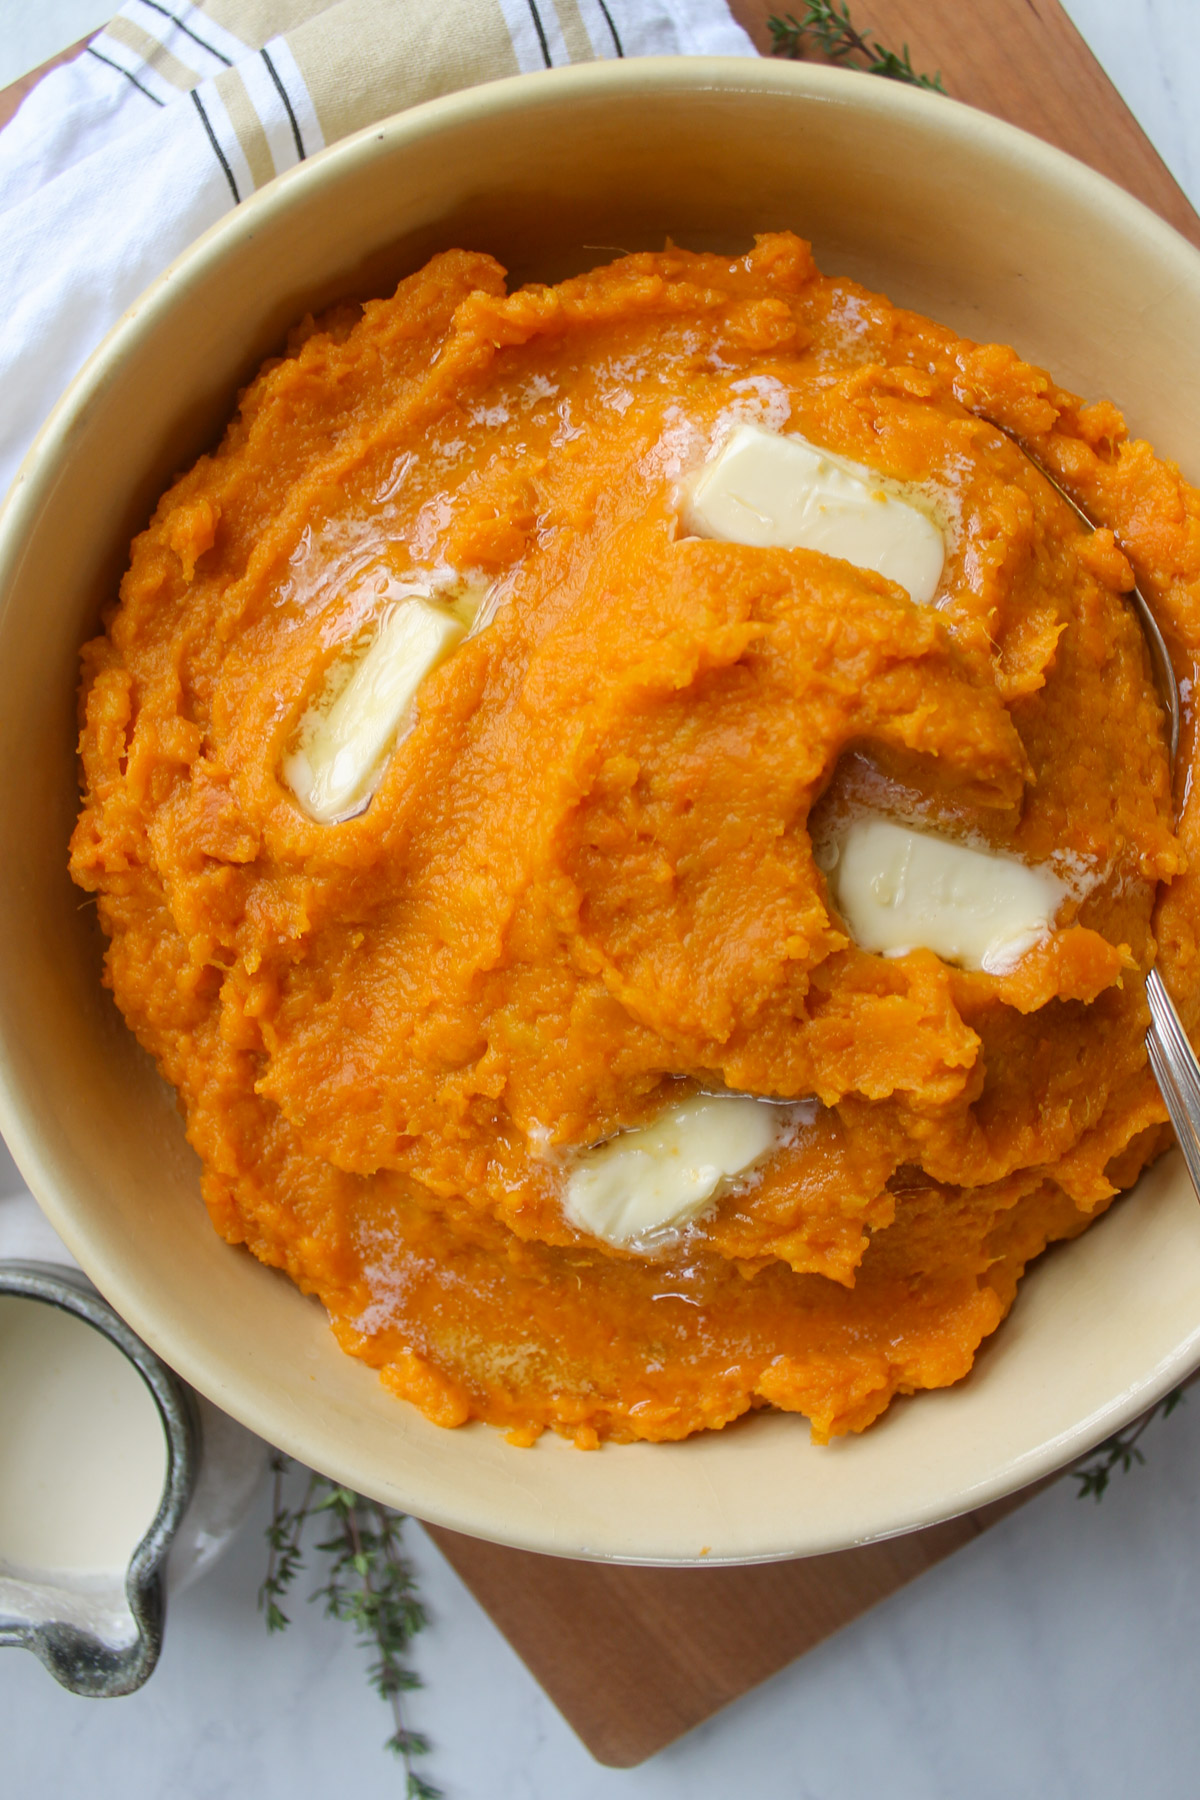 A bowl of mashed sweet potatoes with pats of melting butter.